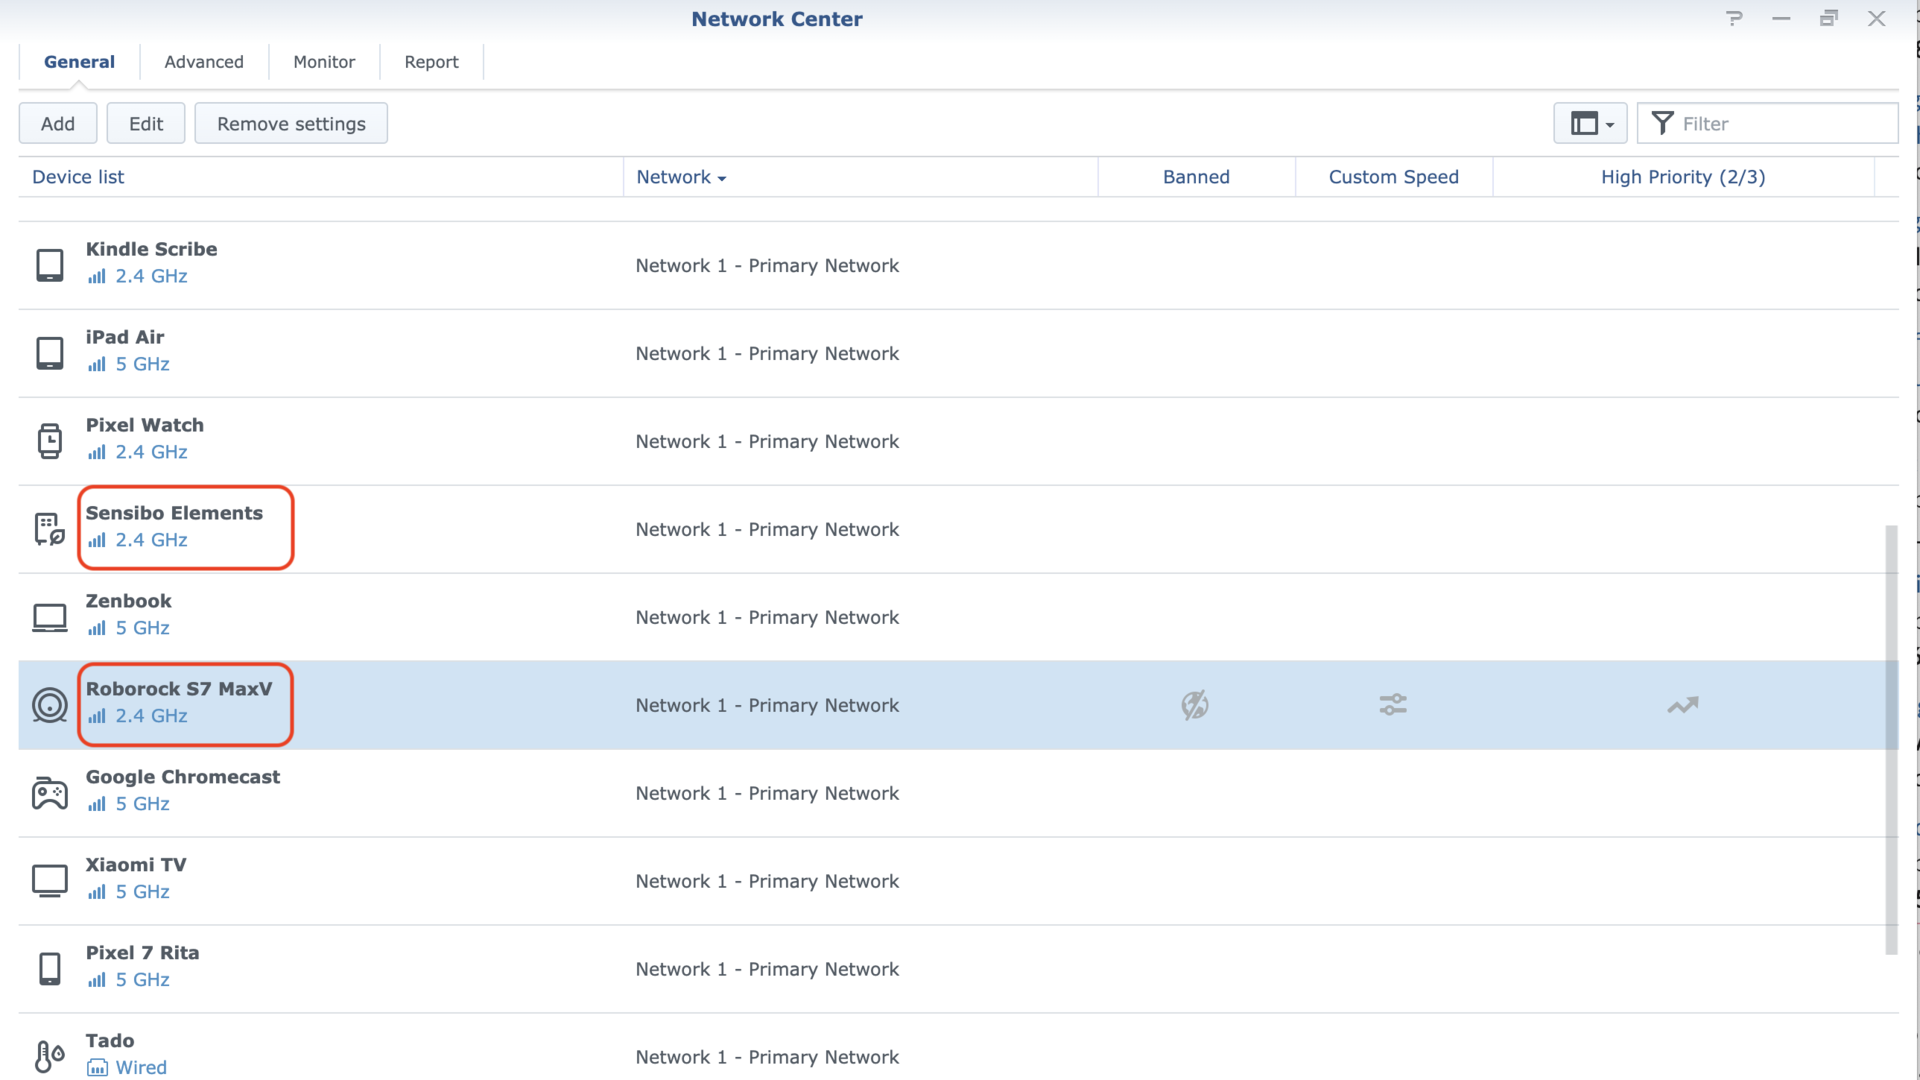 synology network center 2.4ghz devices